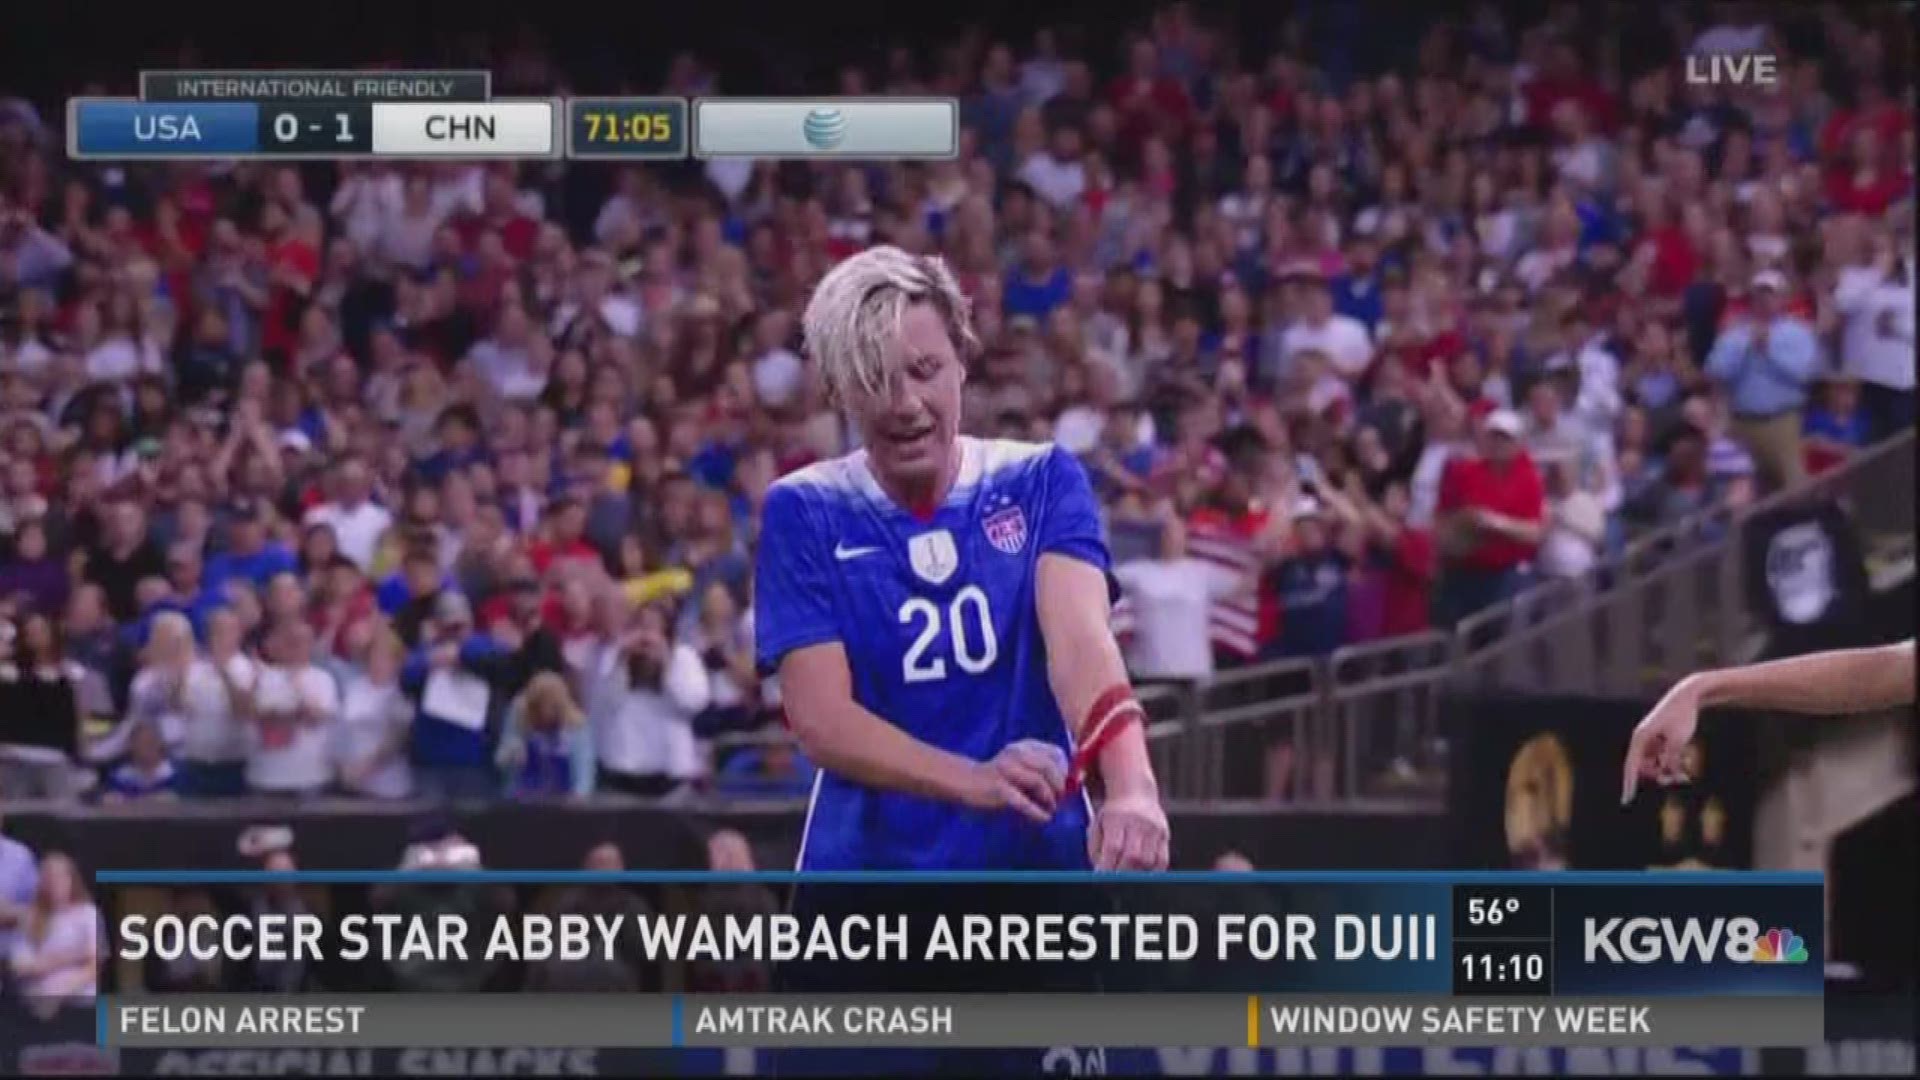 Retired soccer star Wambach arrested for DUII